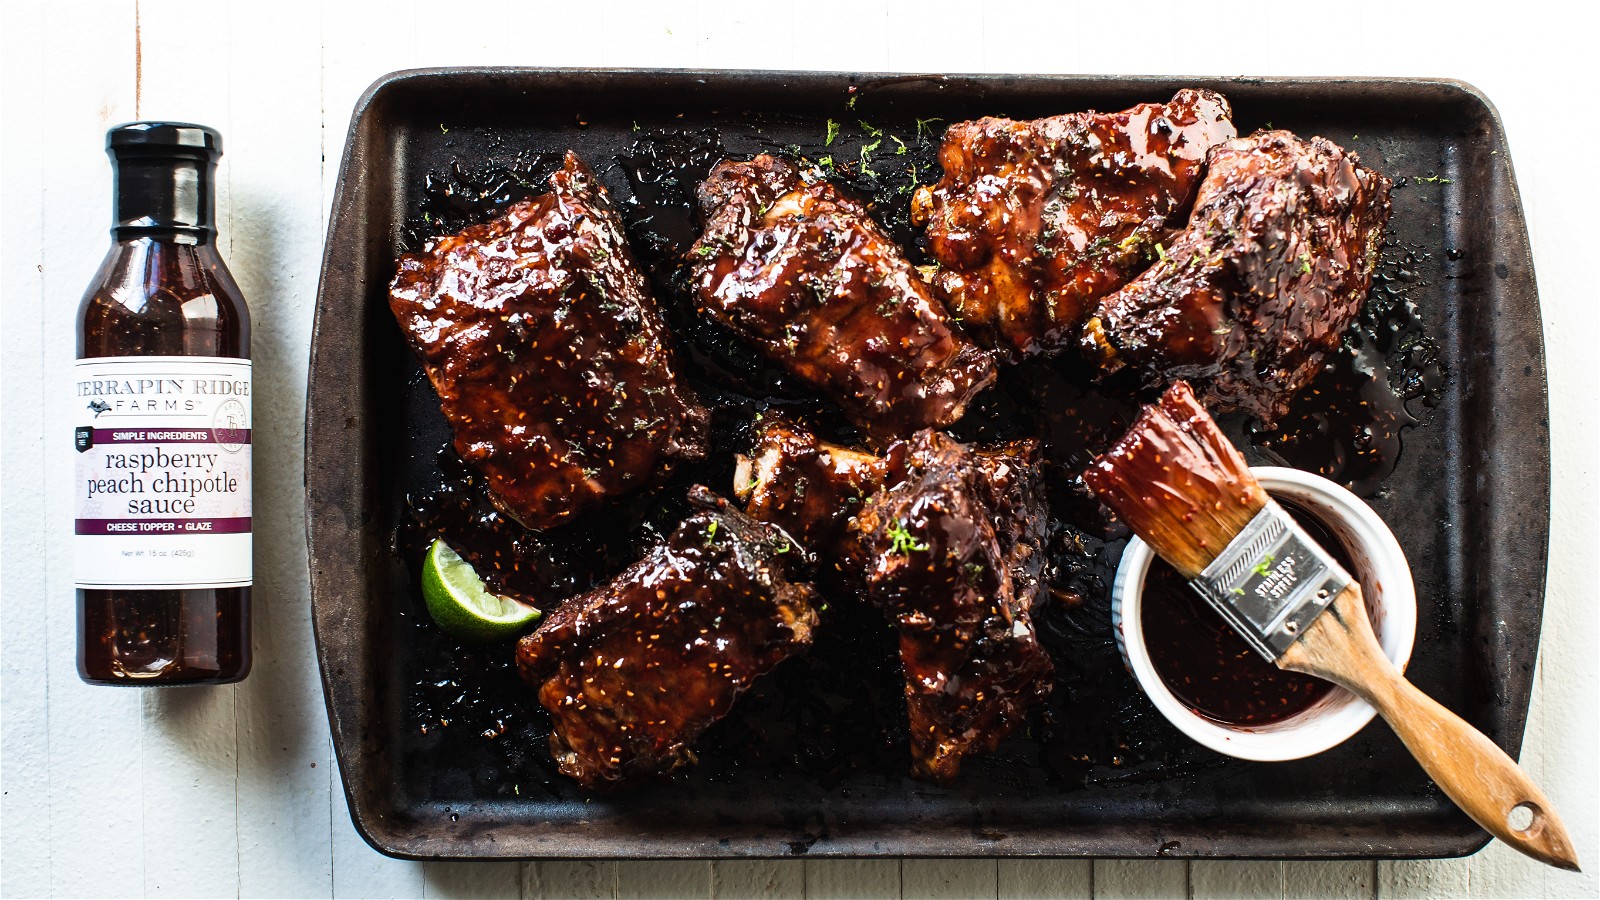 Image of Slow Cooker Ribs with Raspberry Peach Chipotle Sauce